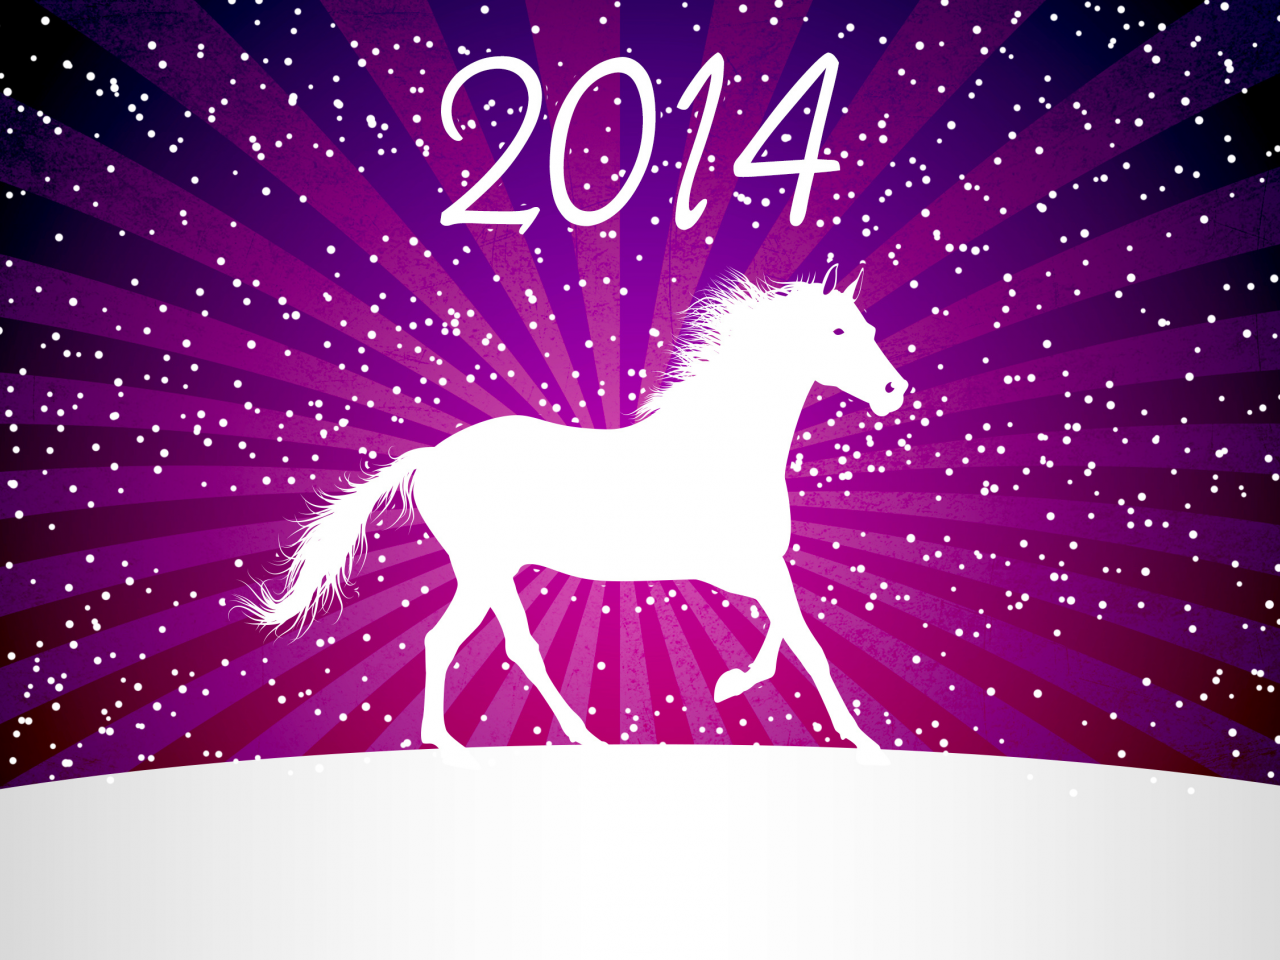 minimalism, winter, cold, 2014, new year, horse, vector, snow